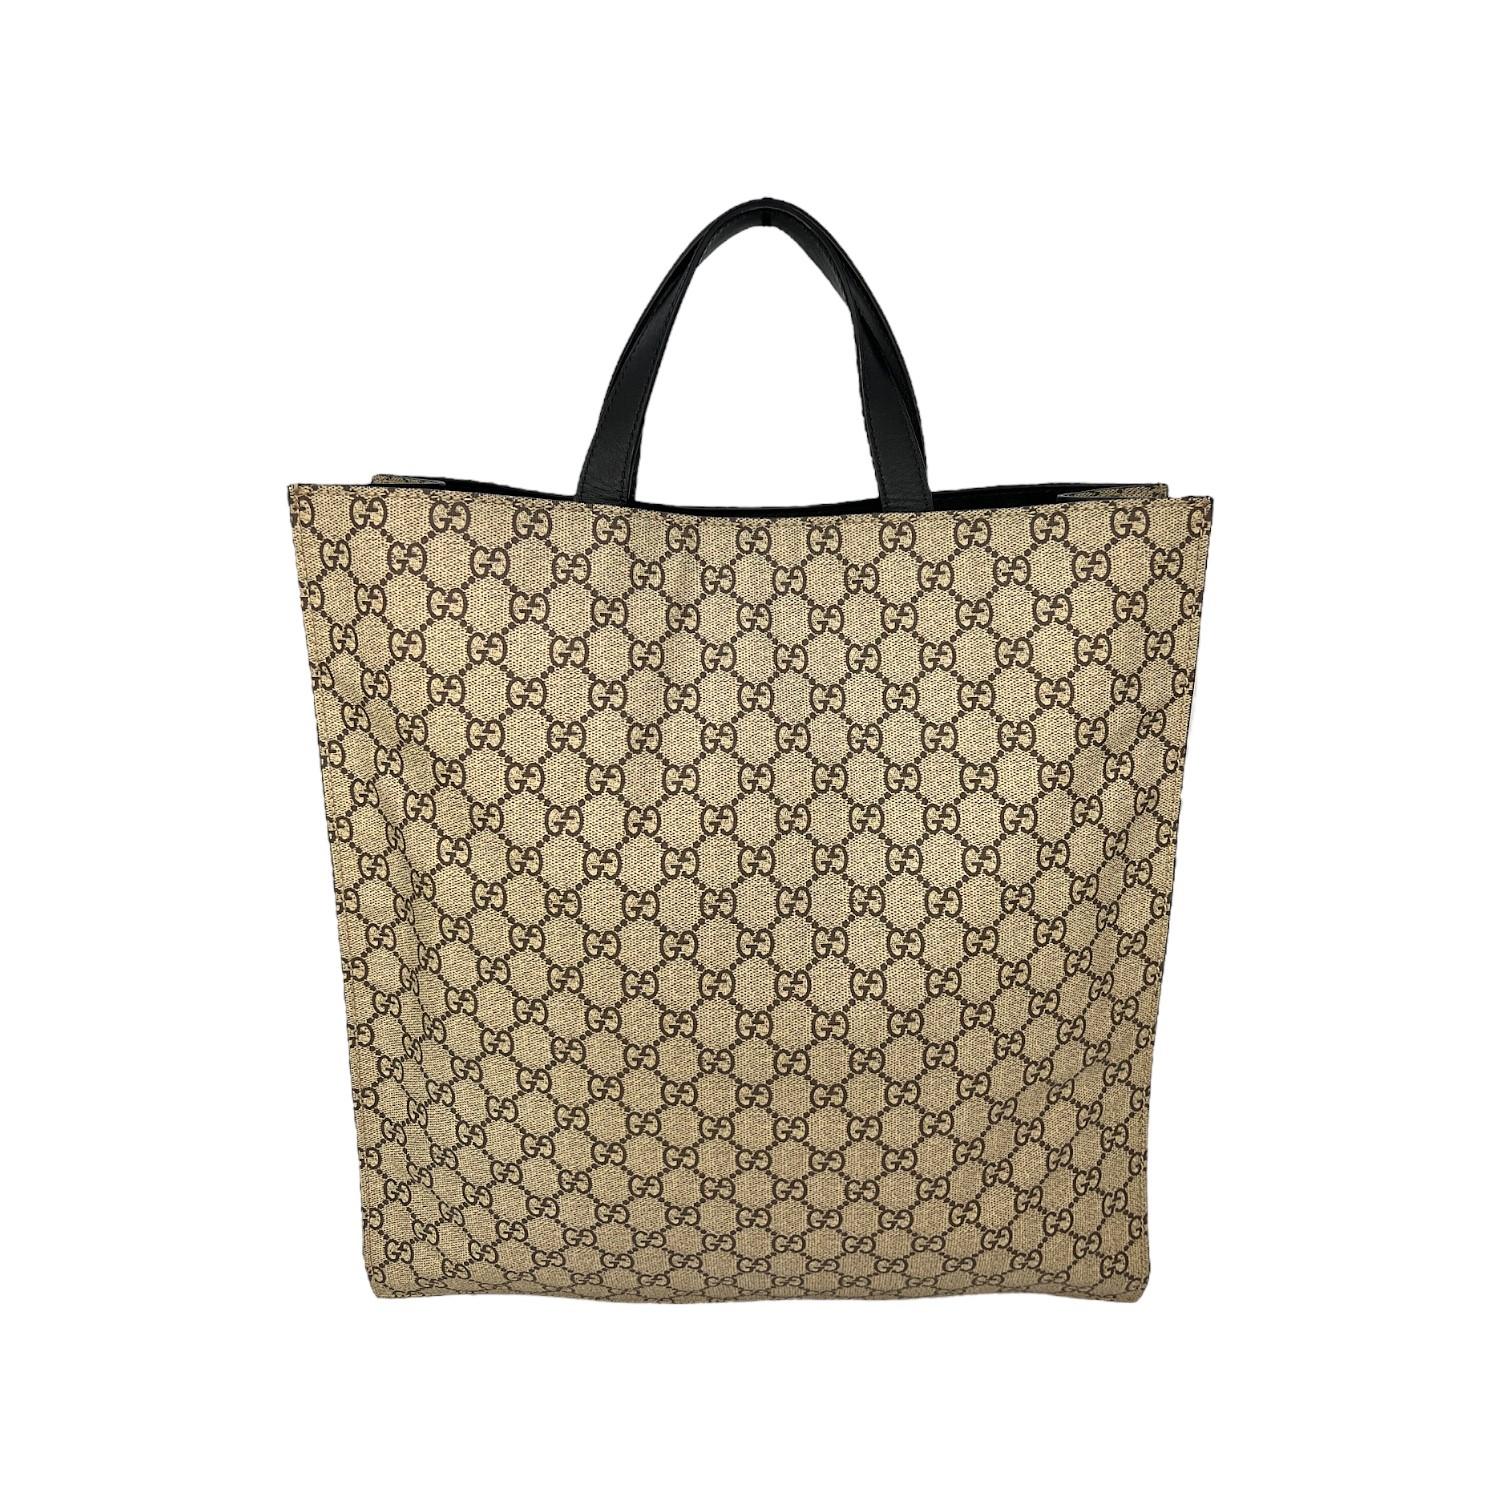 his Gucci GG Supreme 'Blind For Love' Tote was made in Italy and it is finely crafted of the classic Gucci GG Supreme canvas exterior with leather trimming and gold-tone hardware features. It has flat leather top handles and it also comes with a